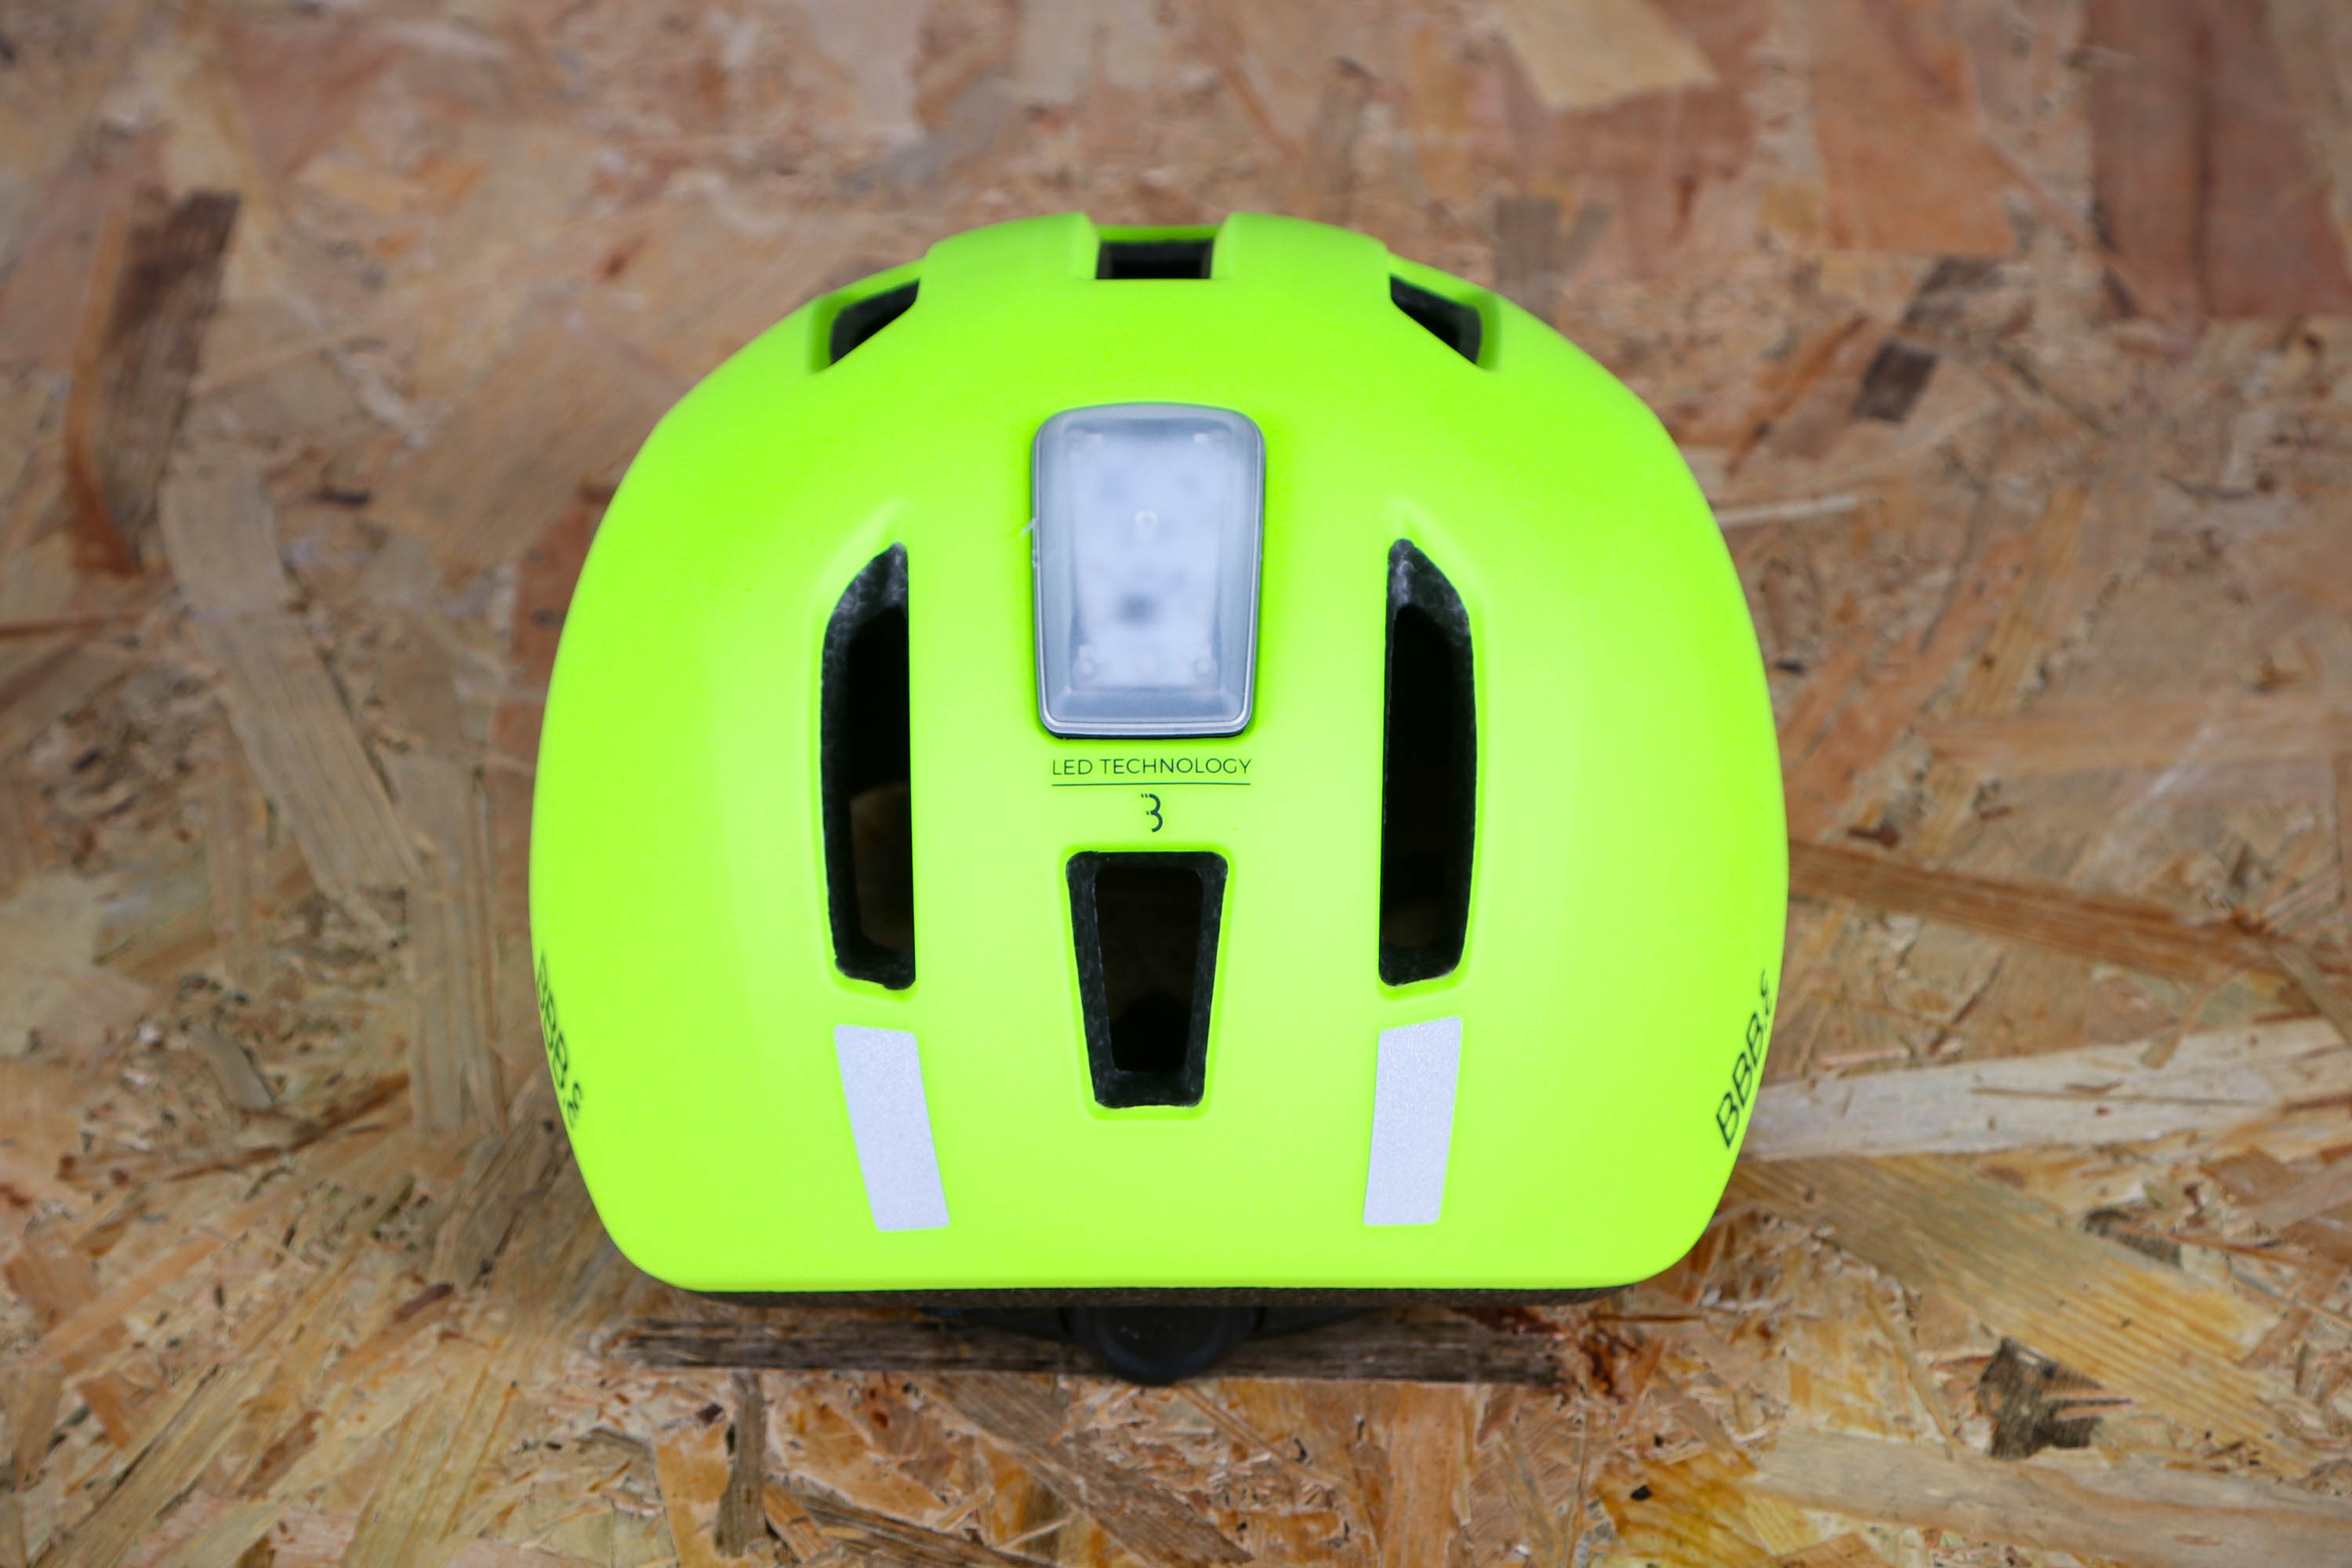 Review: BBB Grid Helmet with Rear LED Light | road.cc